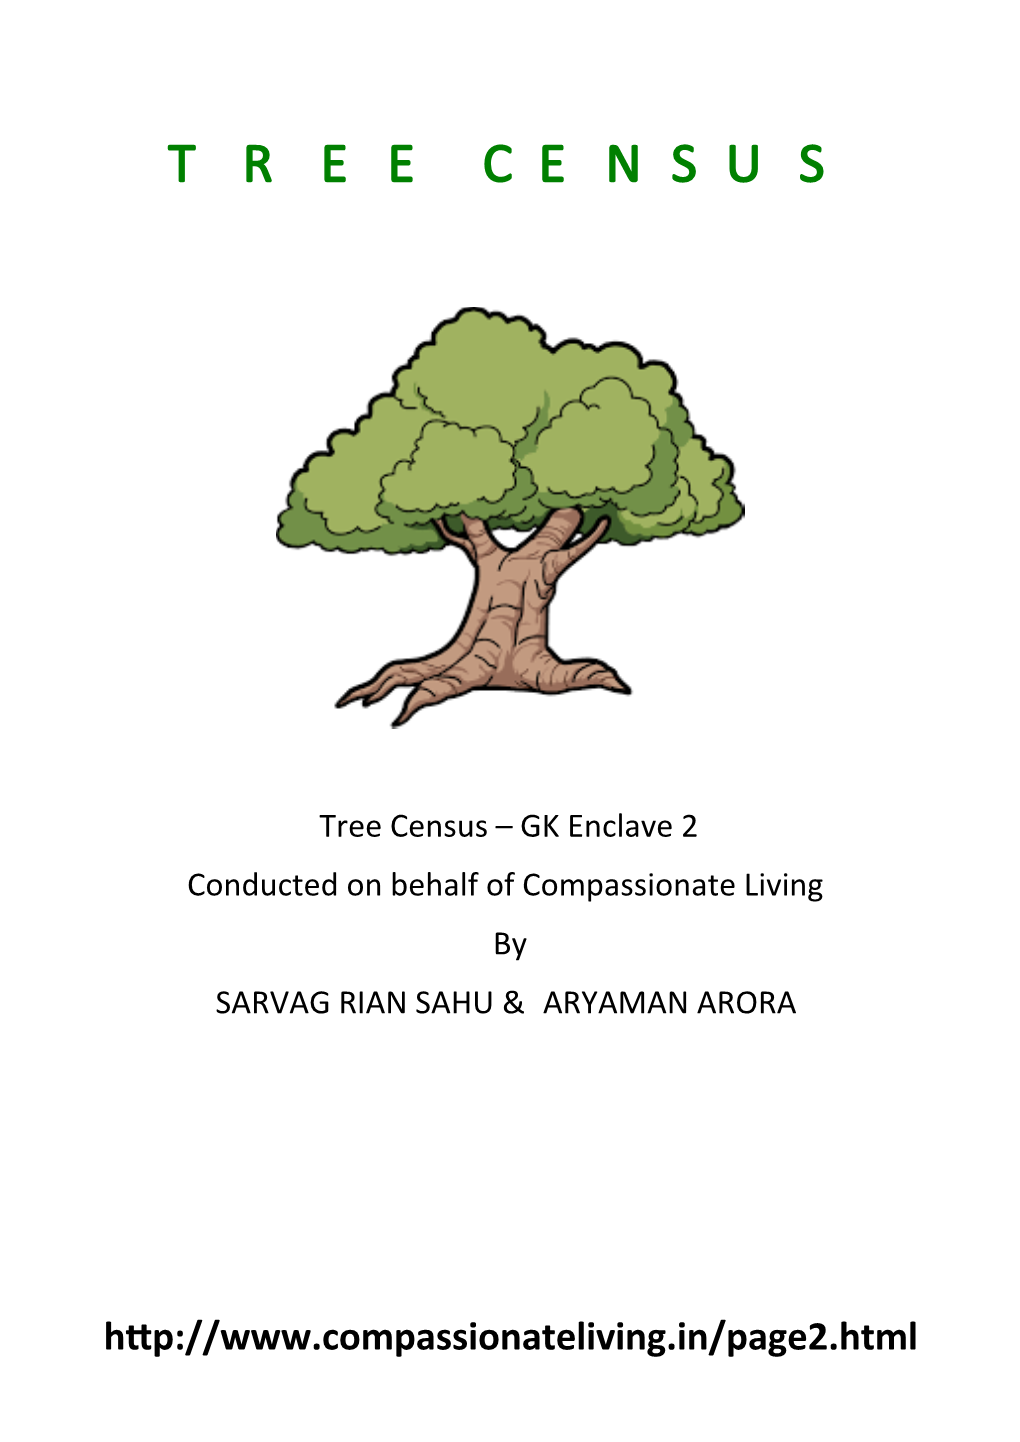 Tree Census – GK Enclave 2 Conducted on Behalf of Compassionate Living By